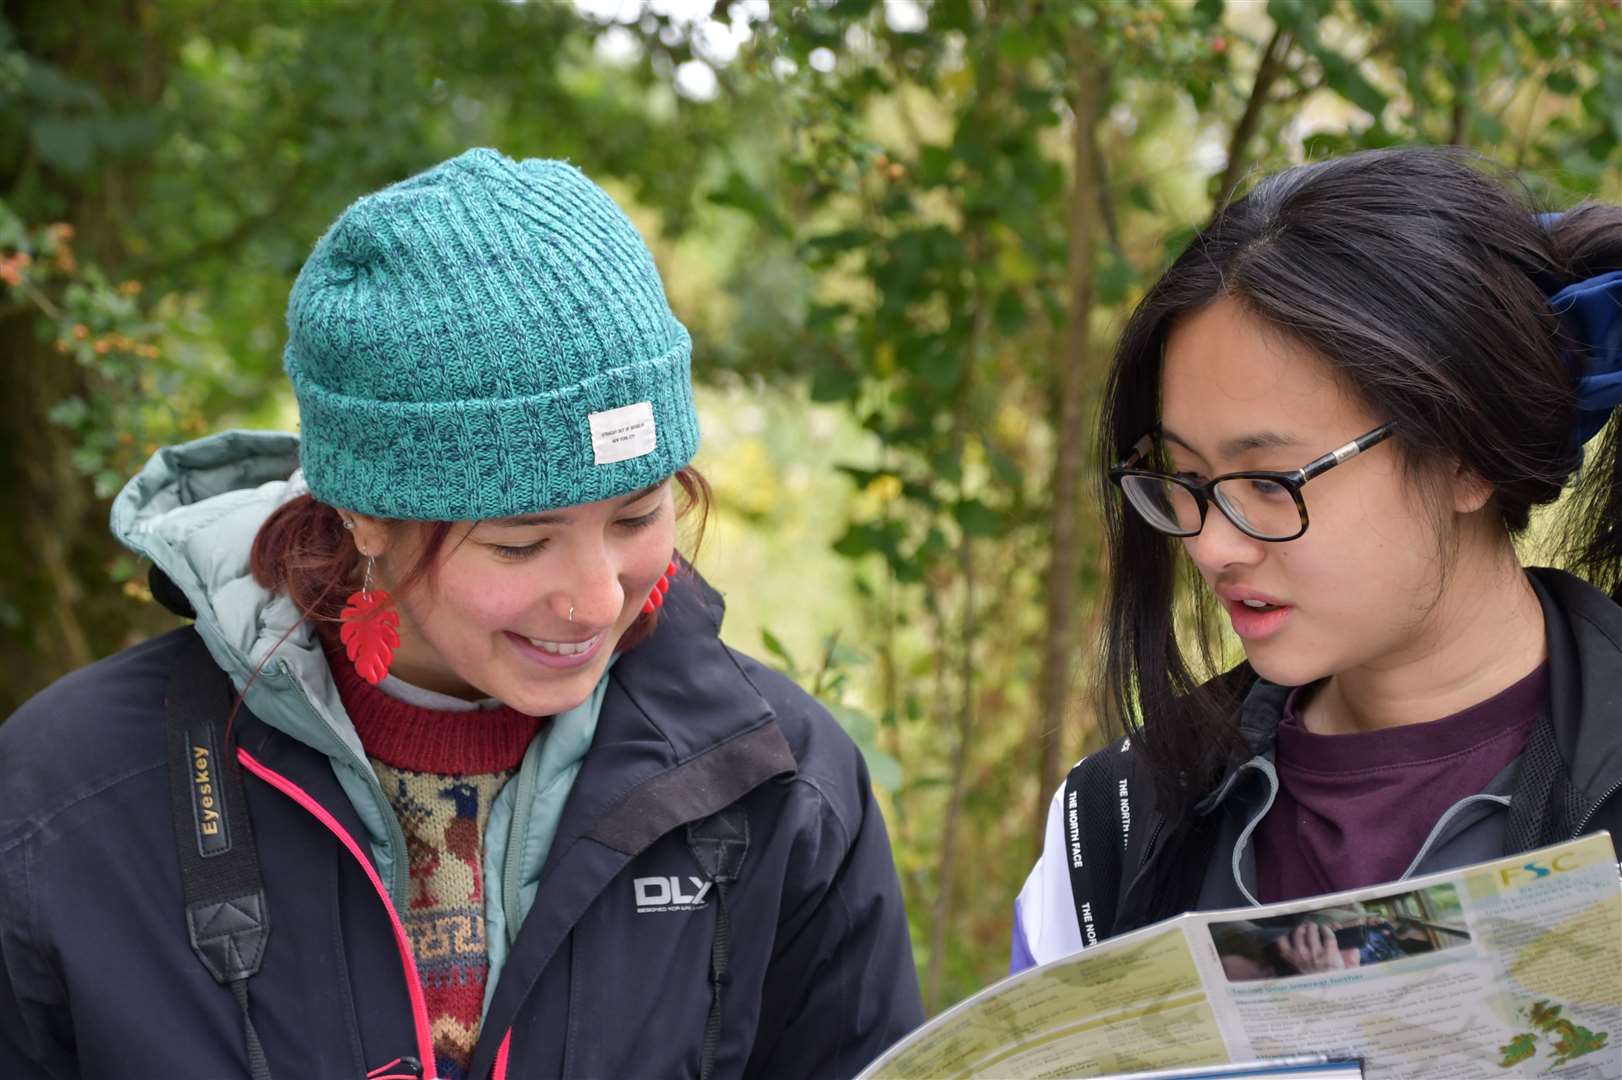 People are being encouraged to take part in the citizen science project by getting out into nature.